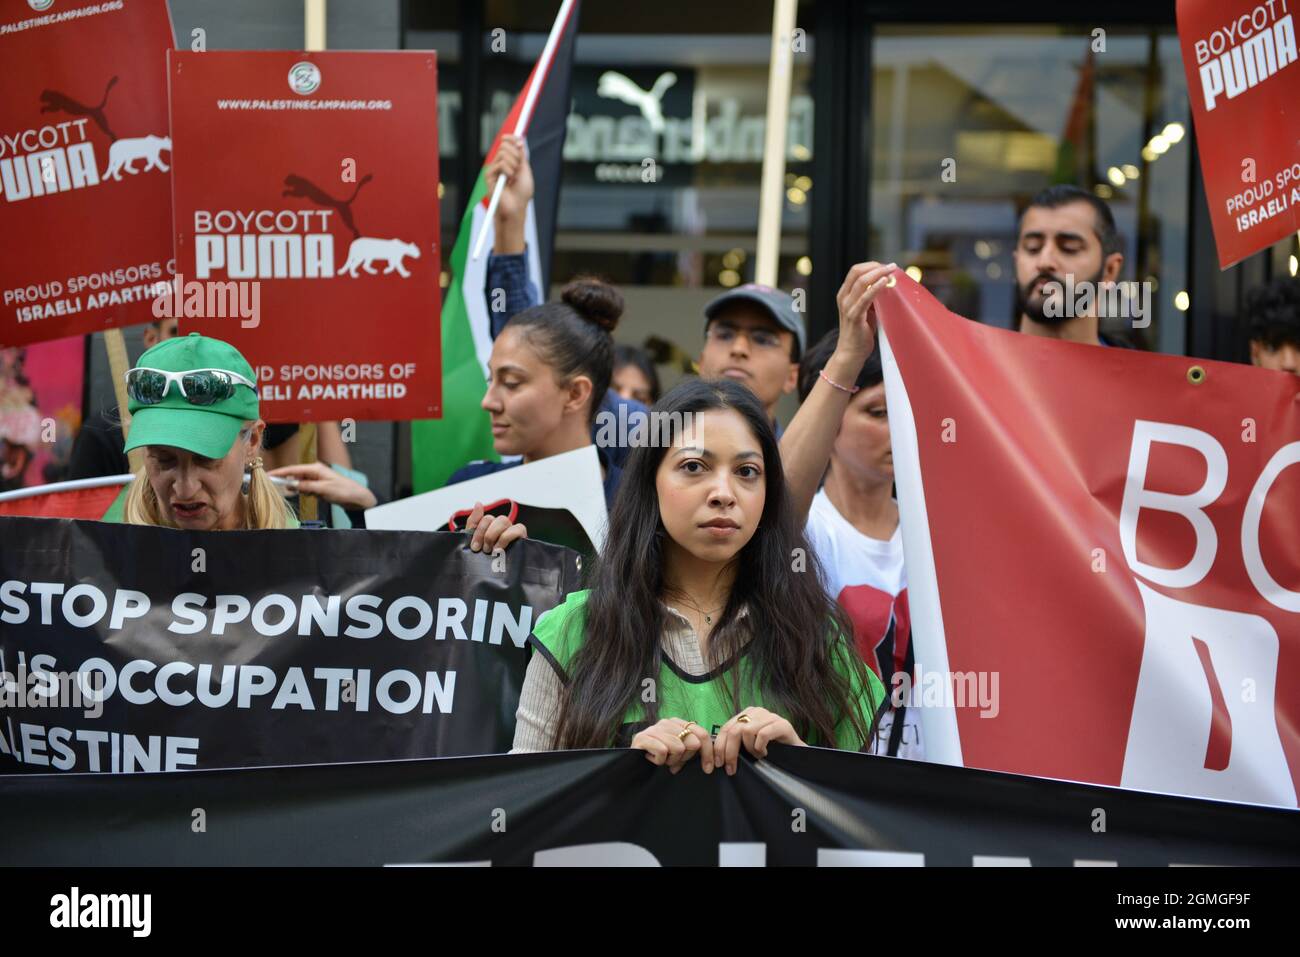 London, UK. 18th Sep, 2021. A protester standing behind a banner during the demonstration.Boycott Puma protest organised by Palestine Solidarity Campaign and FOA (Friends of Al Aqsa) at Puma flagship store on Carnaby Street, London. Activists demonstrated against Puma's sponsorship of the IFA (Israel Football Association). Credit: SOPA Images Limited/Alamy Live News Stock Photo